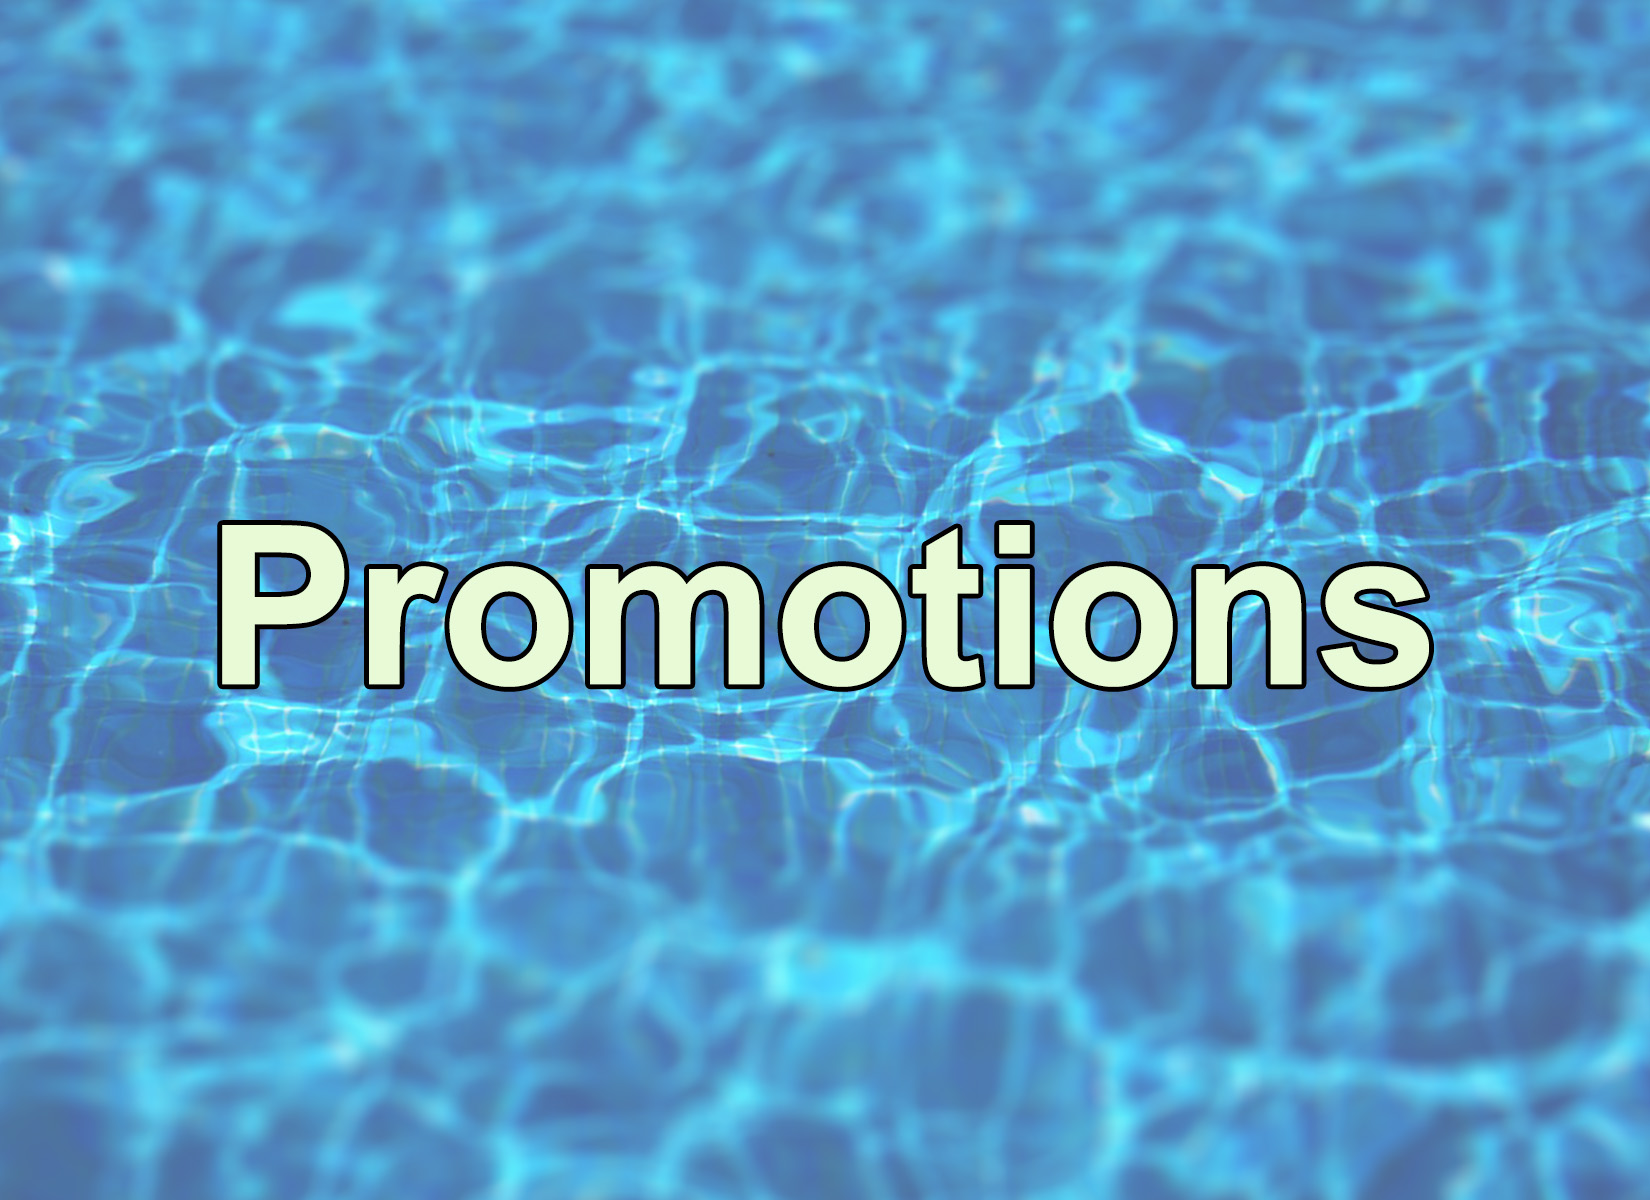 Hearth, Spa & Leisure's Promotions